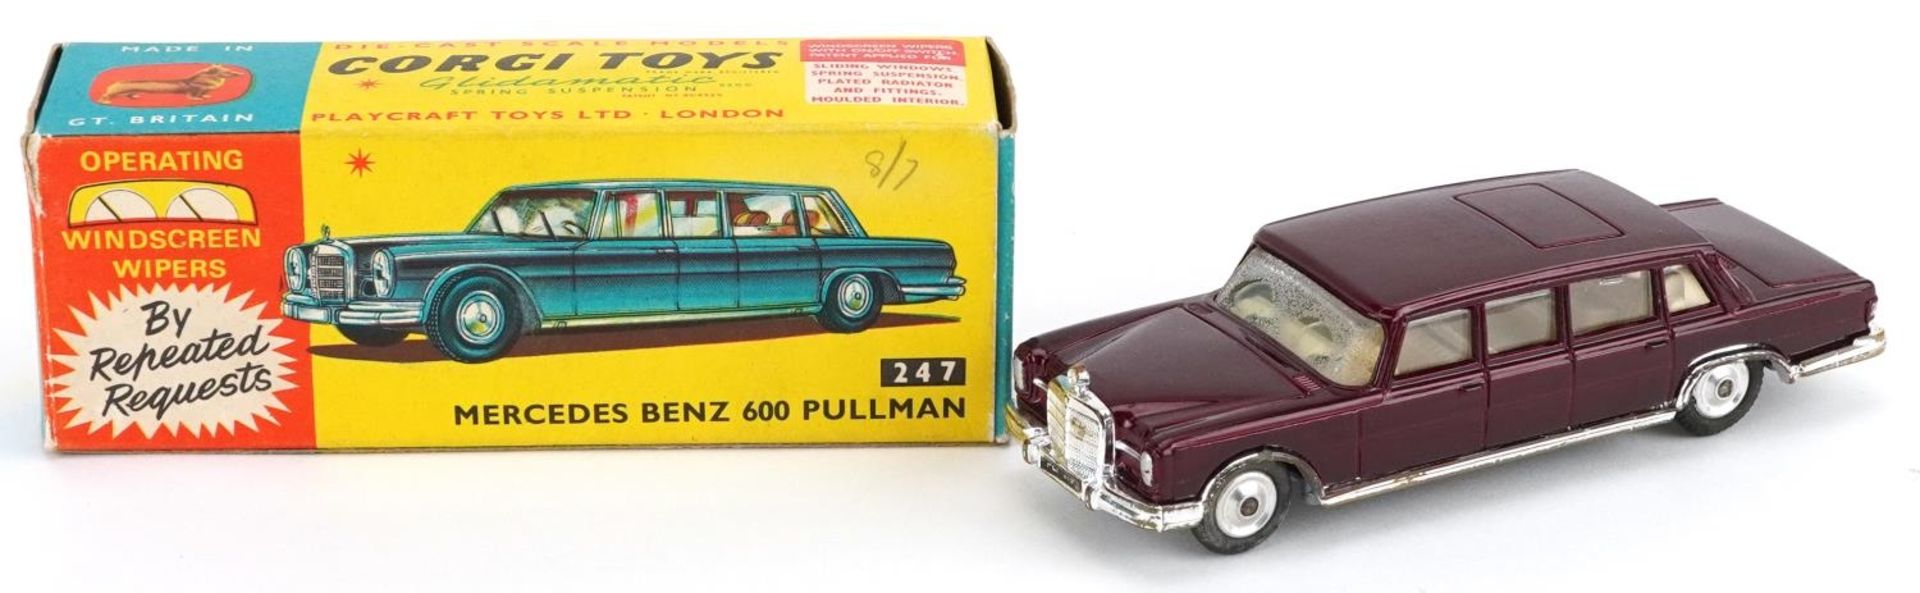 Vintage Corgi Toys diecast Mercedes Benz 600 Pullman with box numbered 247